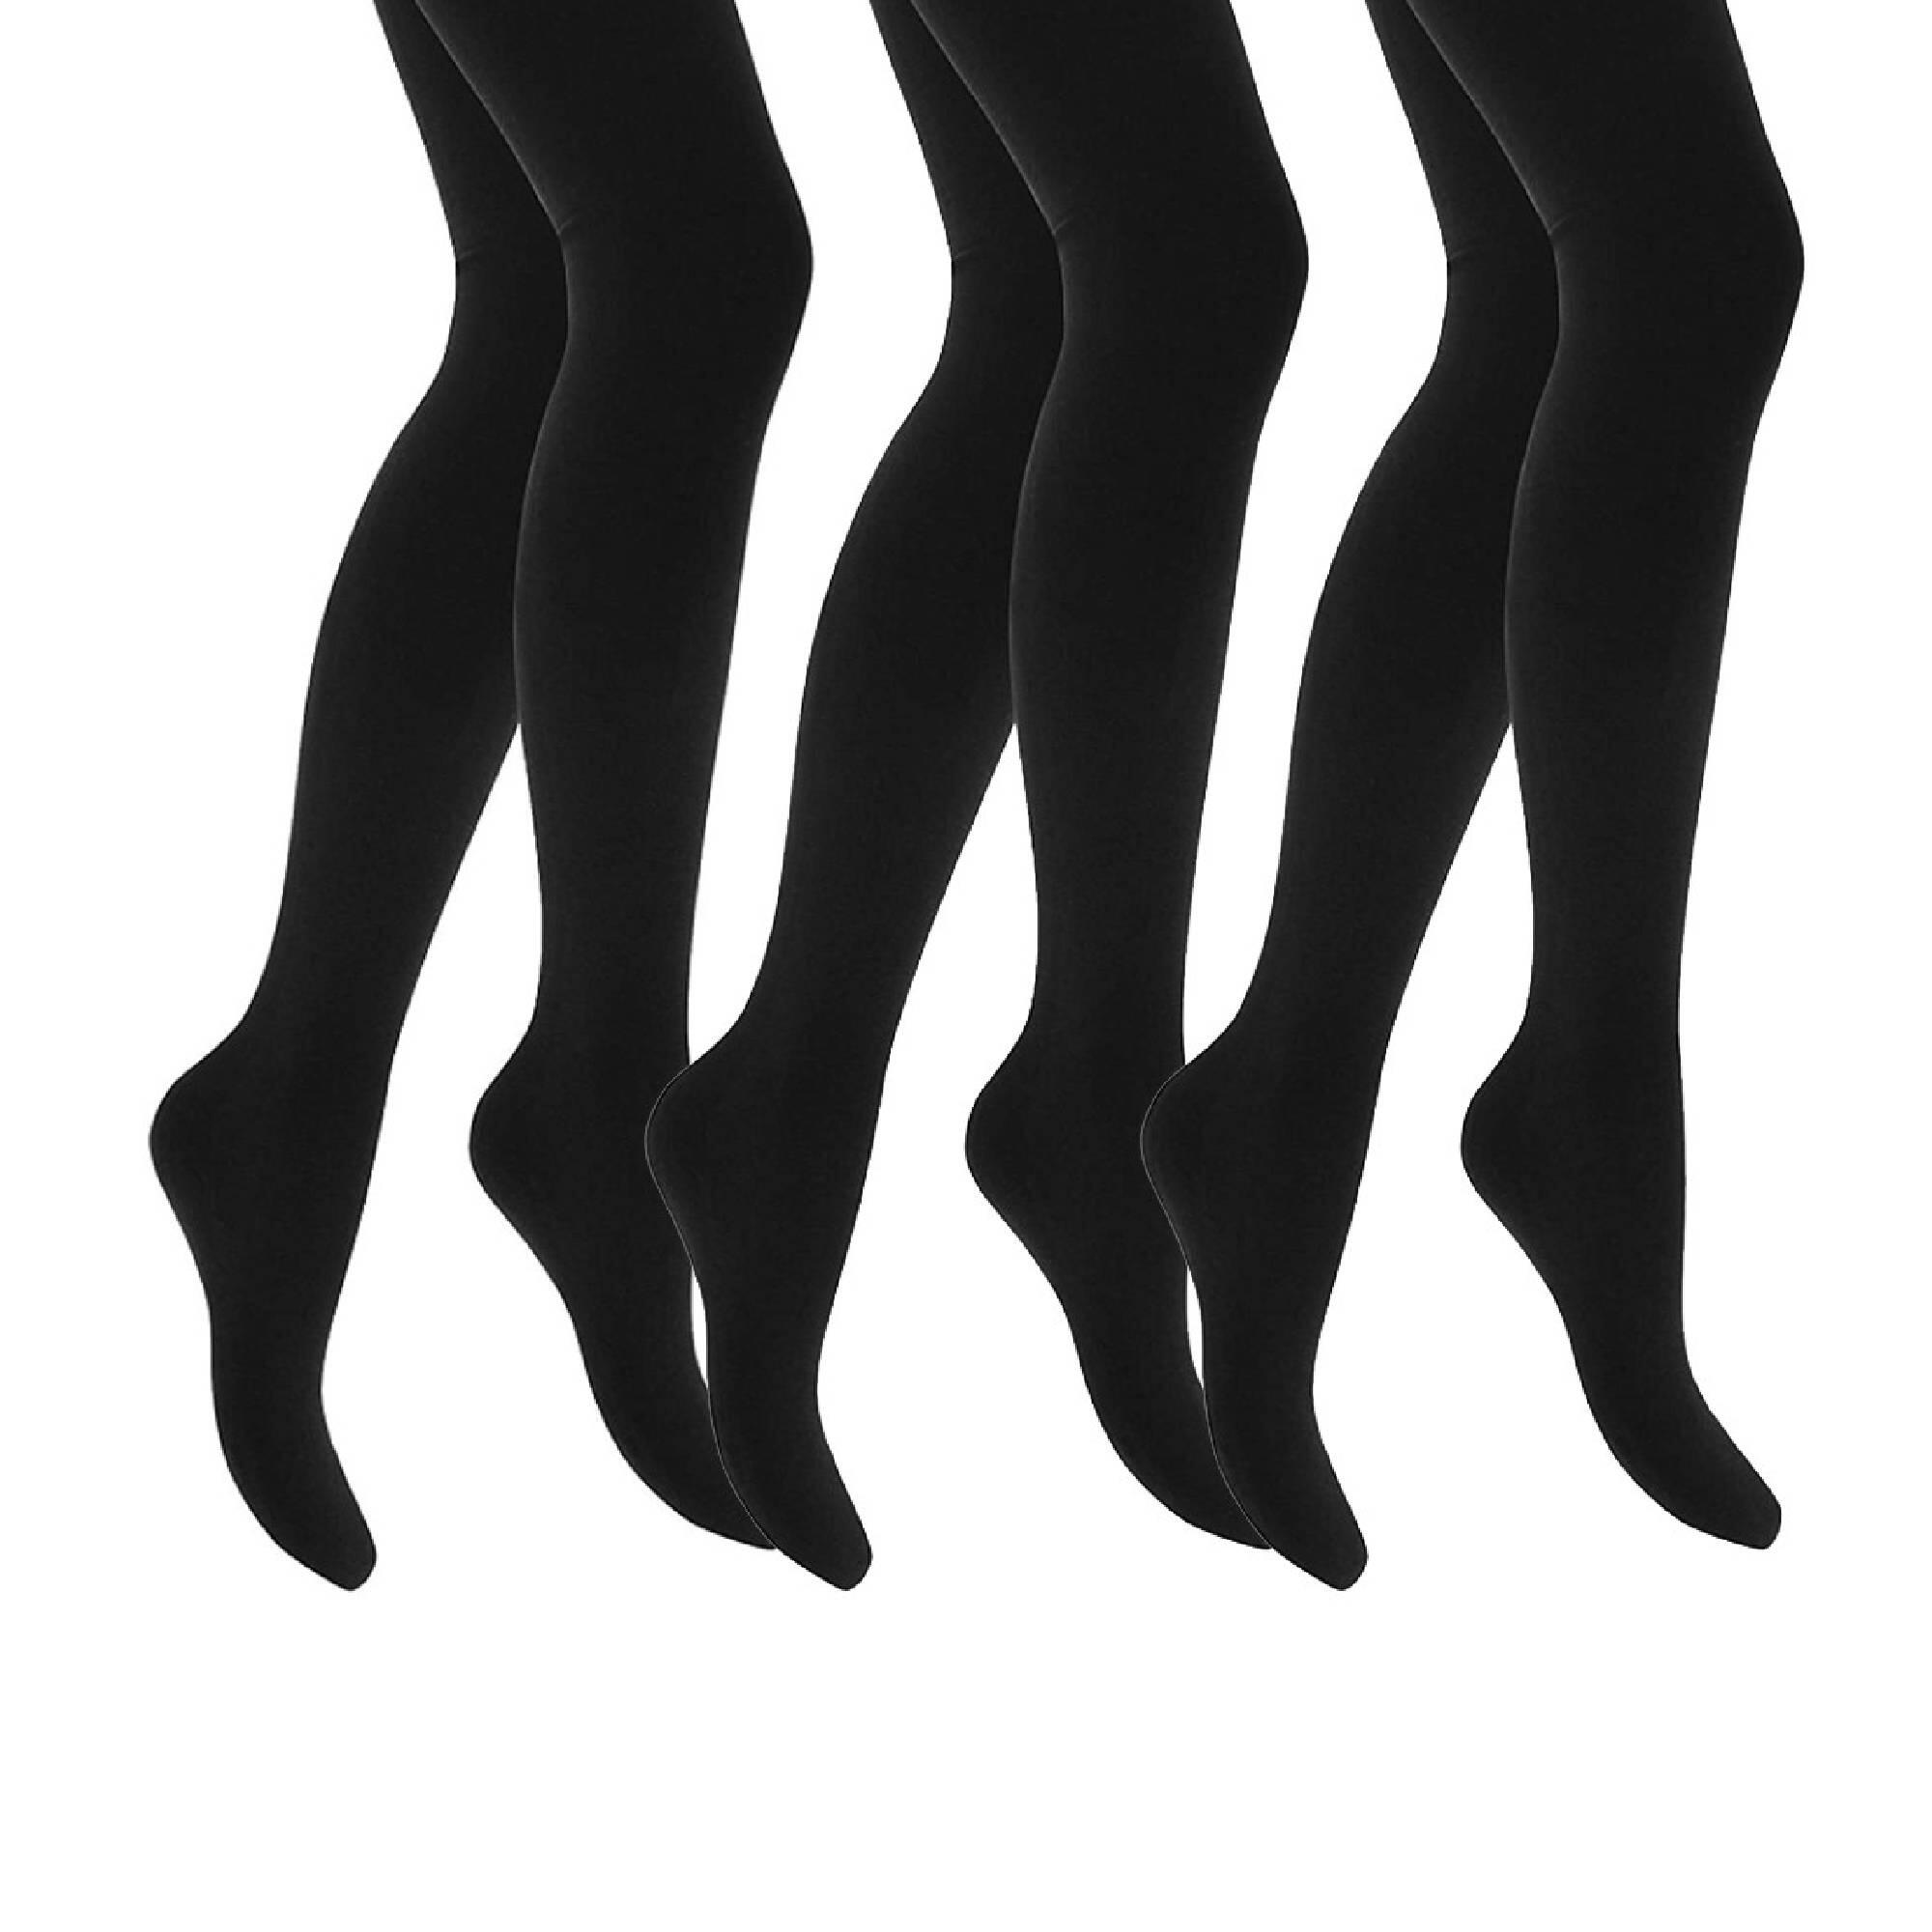 Women's Tights Winter Thermal Tights Warm Fleece Lined Pantyhose